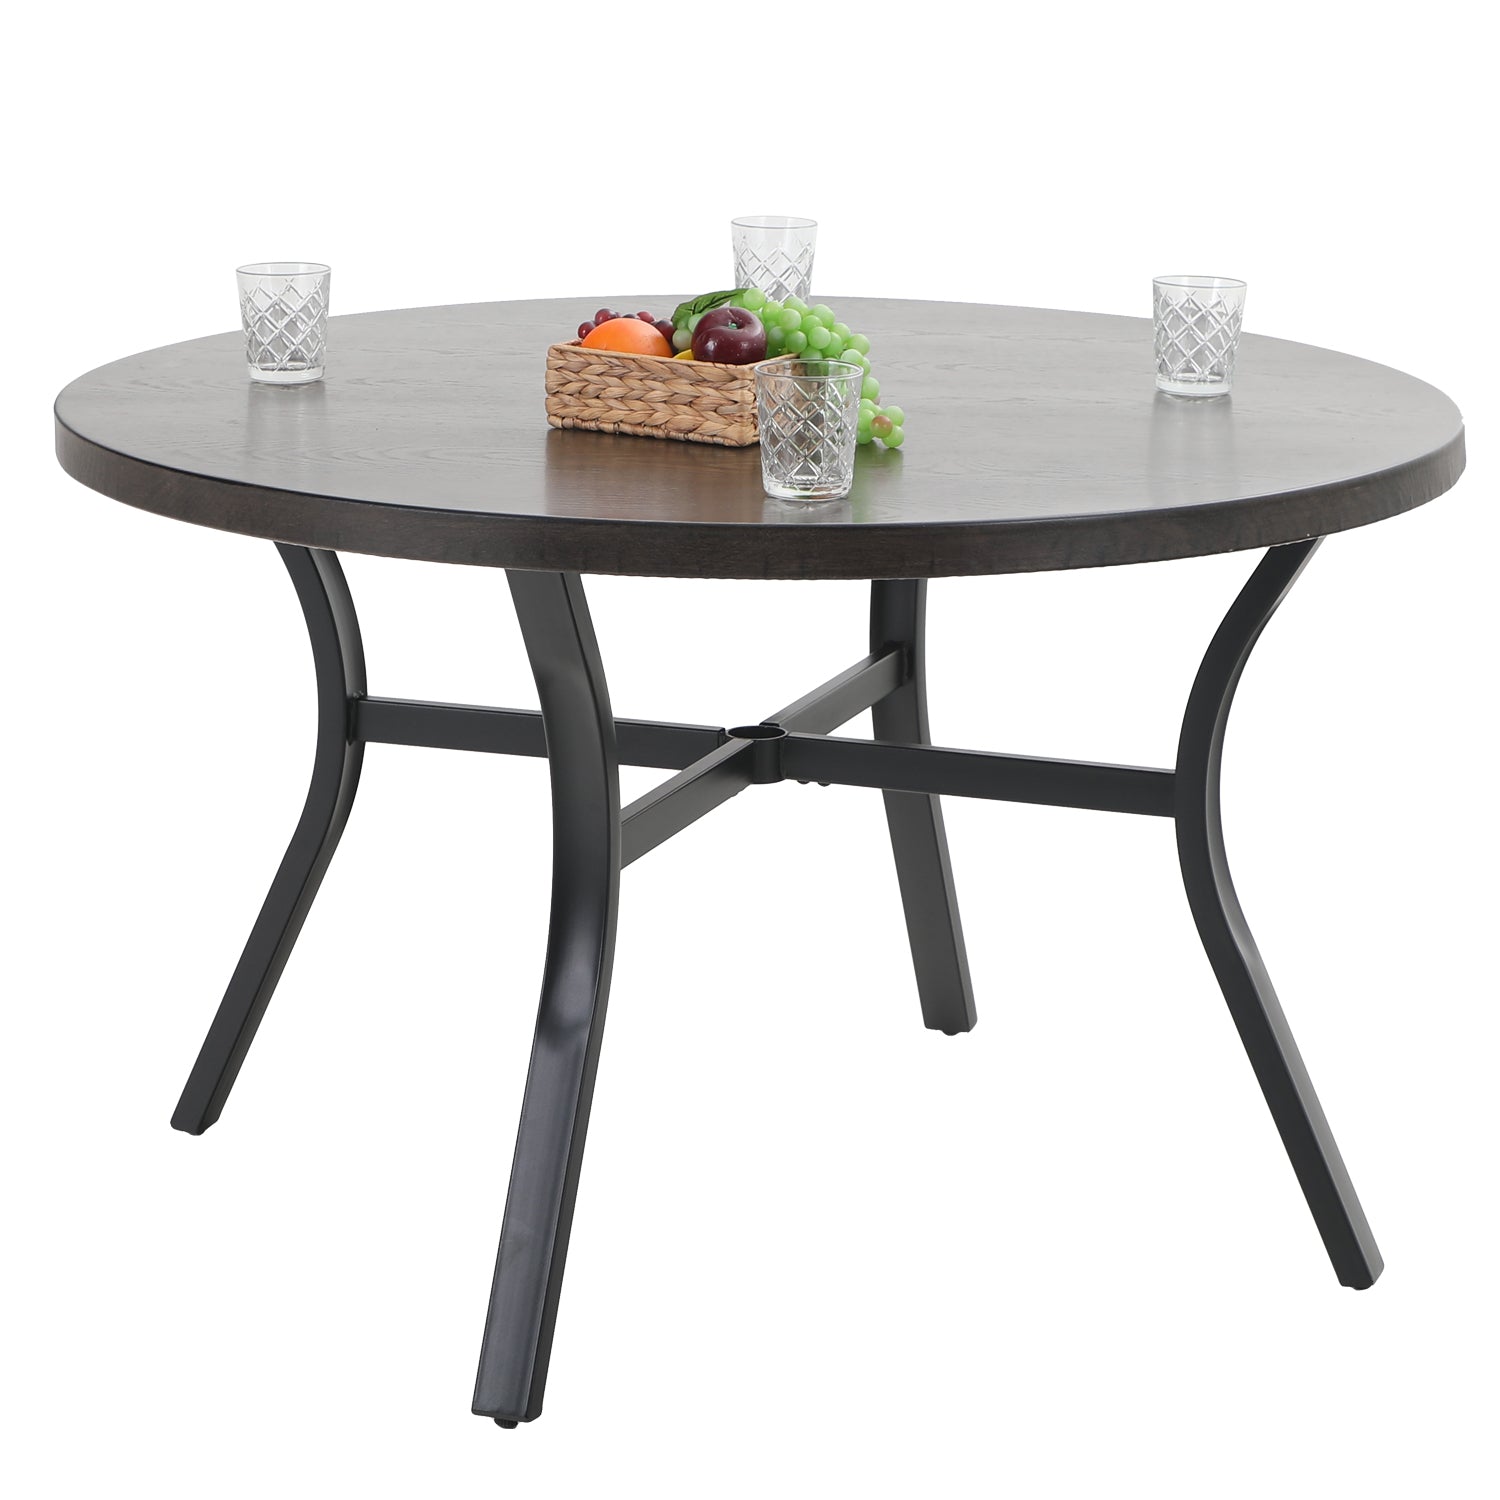 PHI VILLA 44" Wood-look Pattern Metal Round Outdoor Dining Table